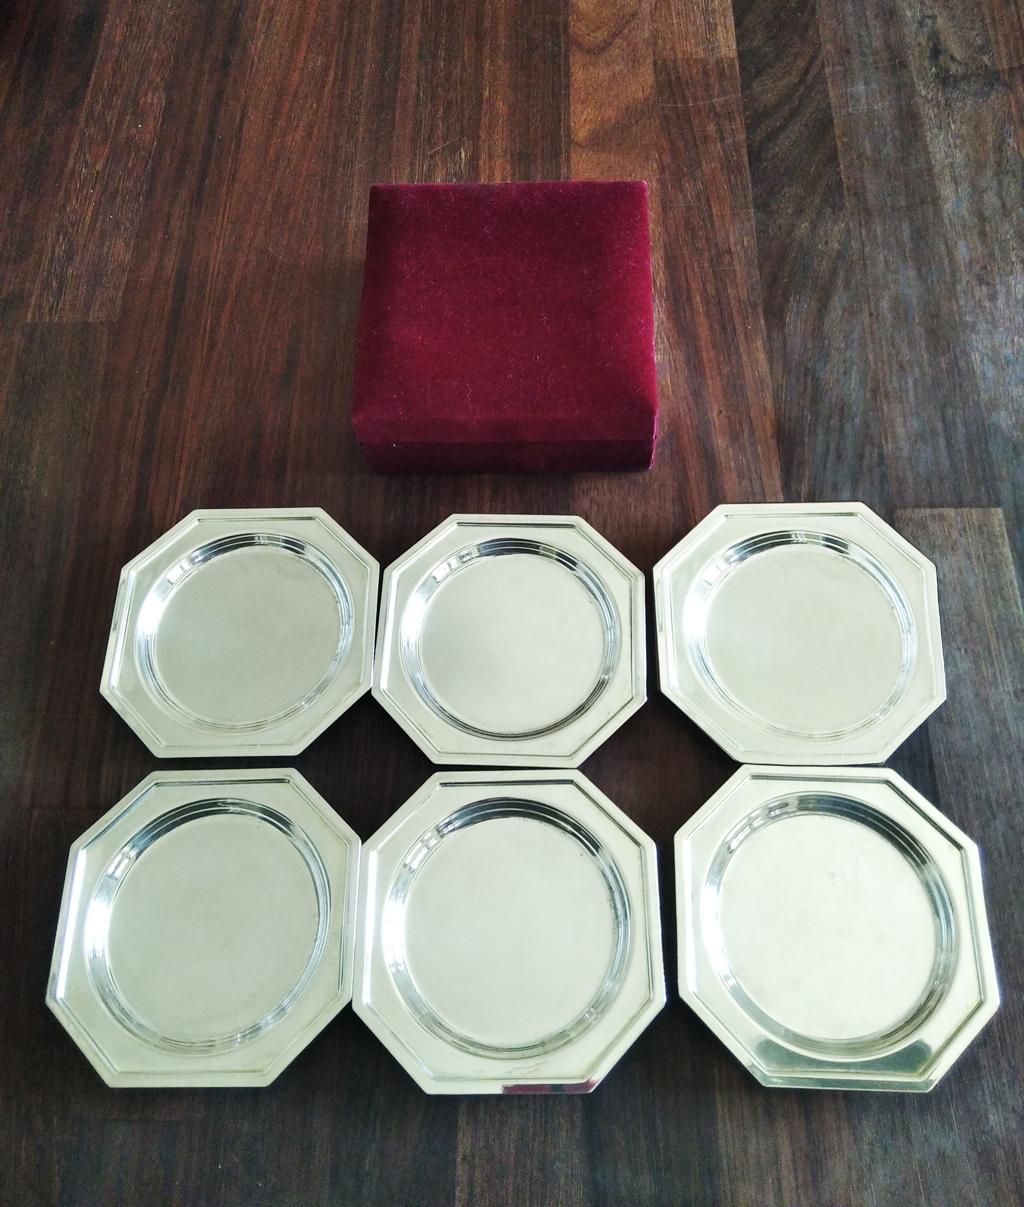 6 Silver or silver plated coasters with velvet case, midcentury

.
 It looks like they were never used

Nice pieces for your table.